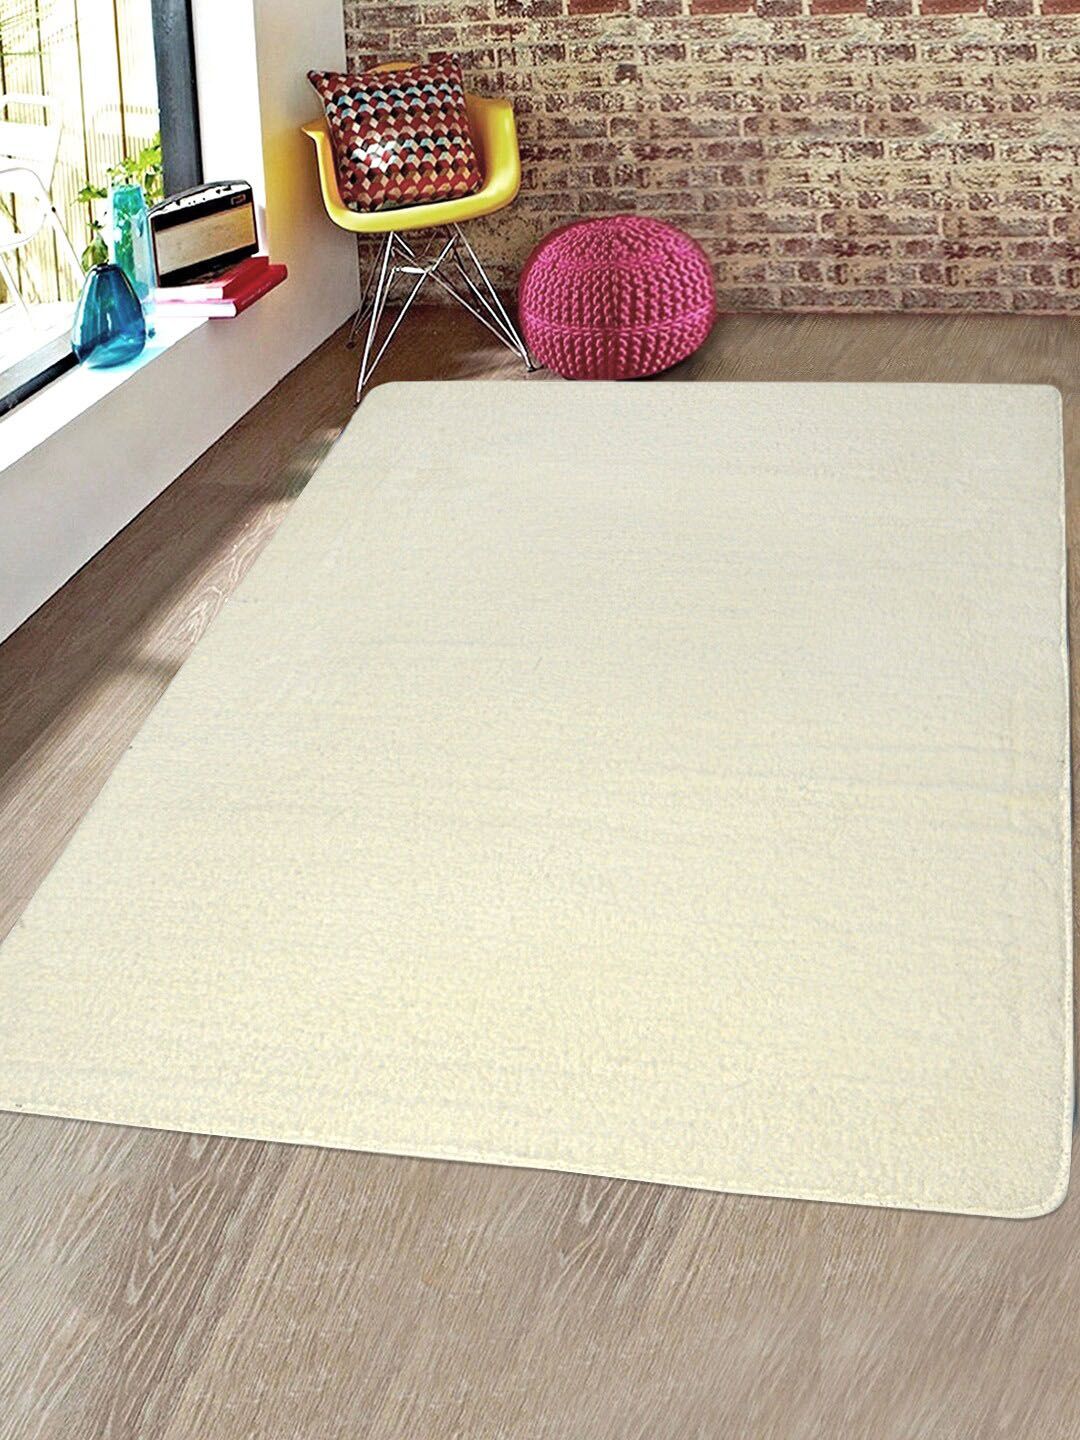 Saral Home Off-White Solid Shaggy Anti-Skid Rectangular Carpet Price in India